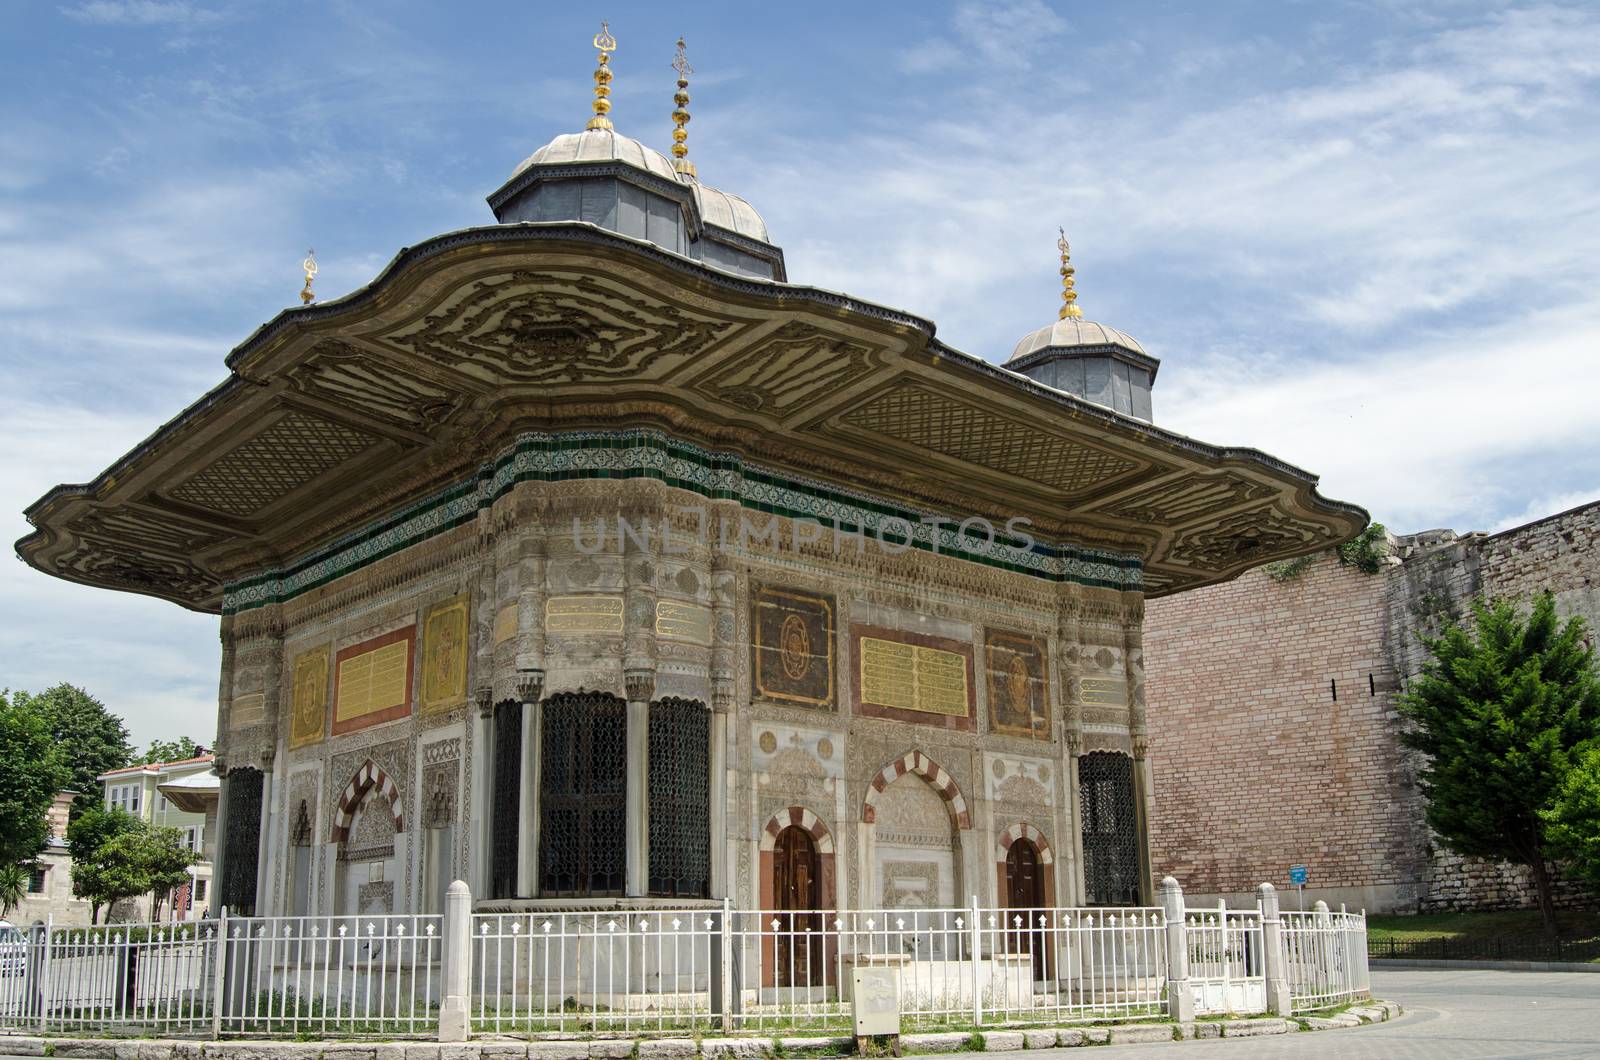 Exterior of the public fountain constructed in 1728 for Sultan Ahmed III just outside the gates to the famous Topkapi Palace in Istanbul, Turkey.  Designed in the Ottoman 'tulip' style it has basins and flowing water for people to use in the middle of this hot and busy city.  